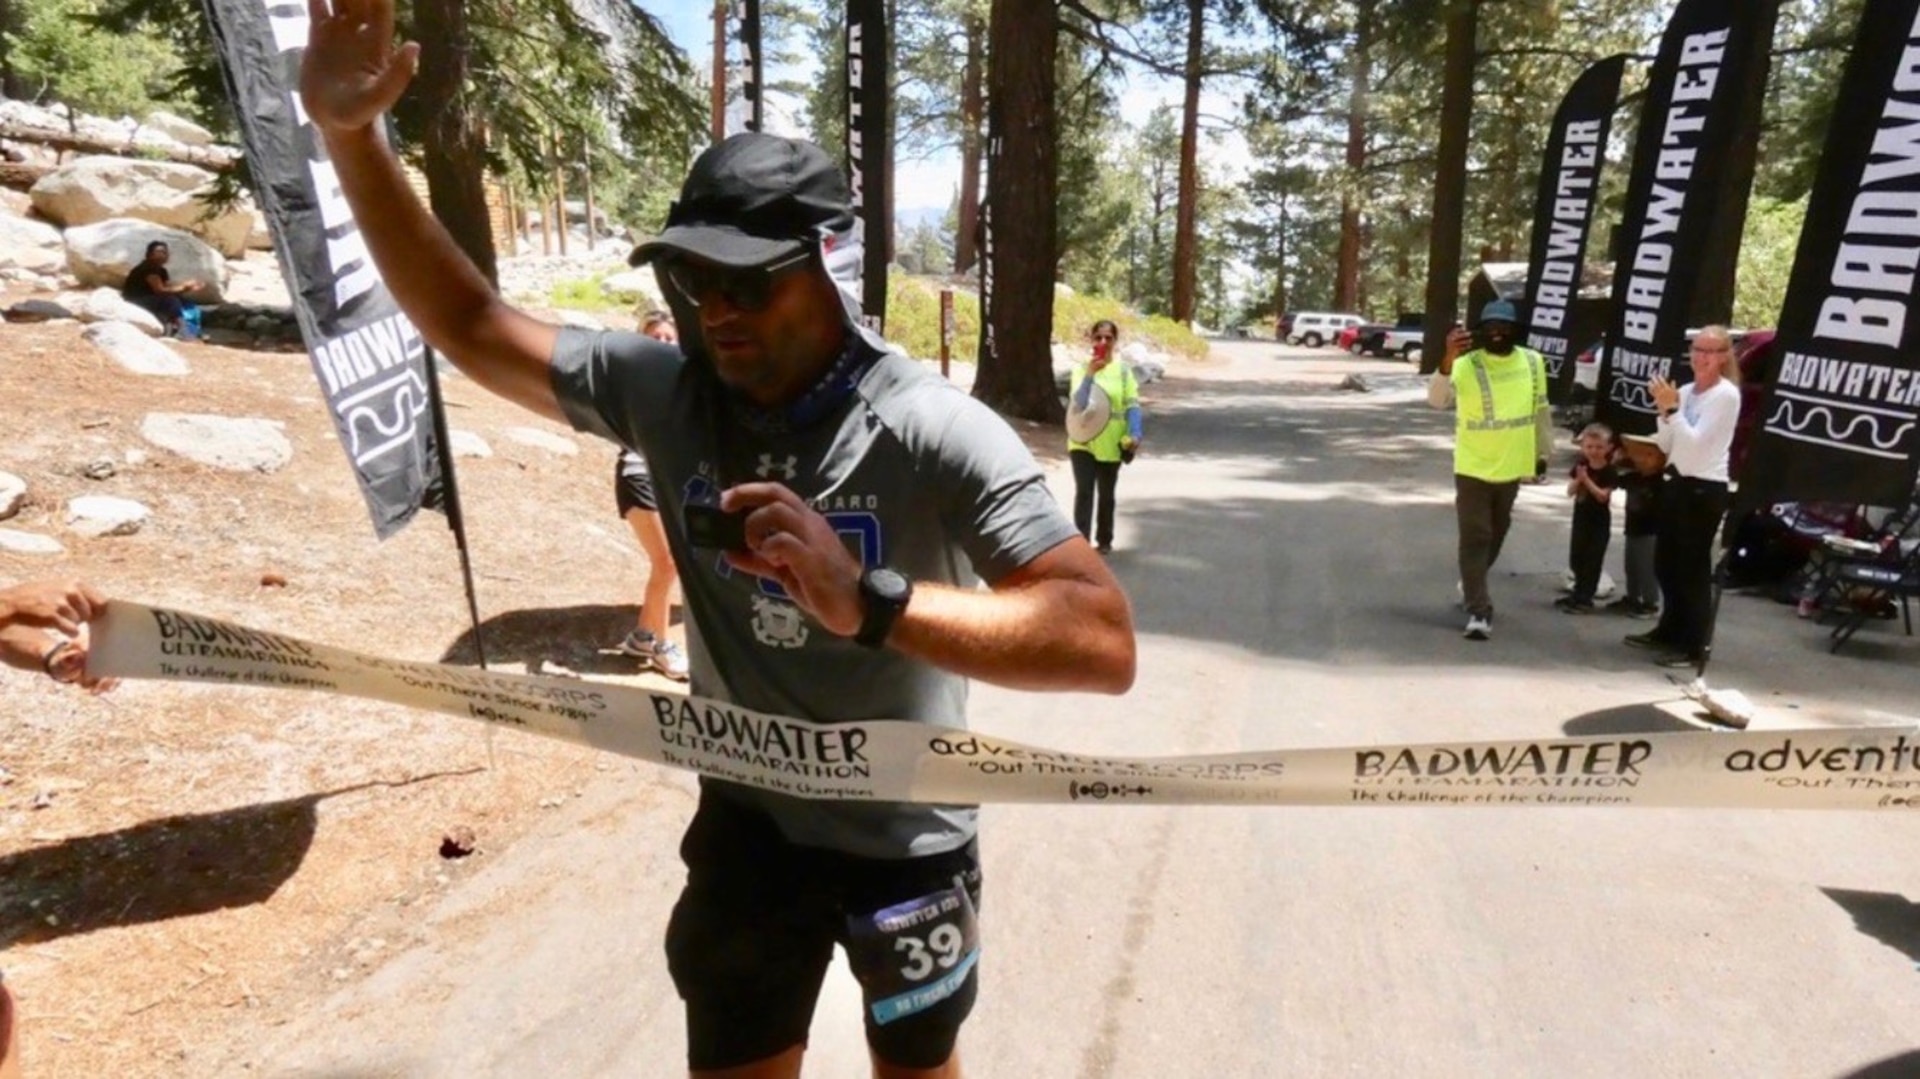 Seaman Nate Dirvin crosses the finish line after running 135 miles through Death Valley to Mount Whitney in California, July 19, 2021. He completed the Badwater 135 to raise funds for Coast Guard Mutual Assistance. U.S. Coast Guard photo.